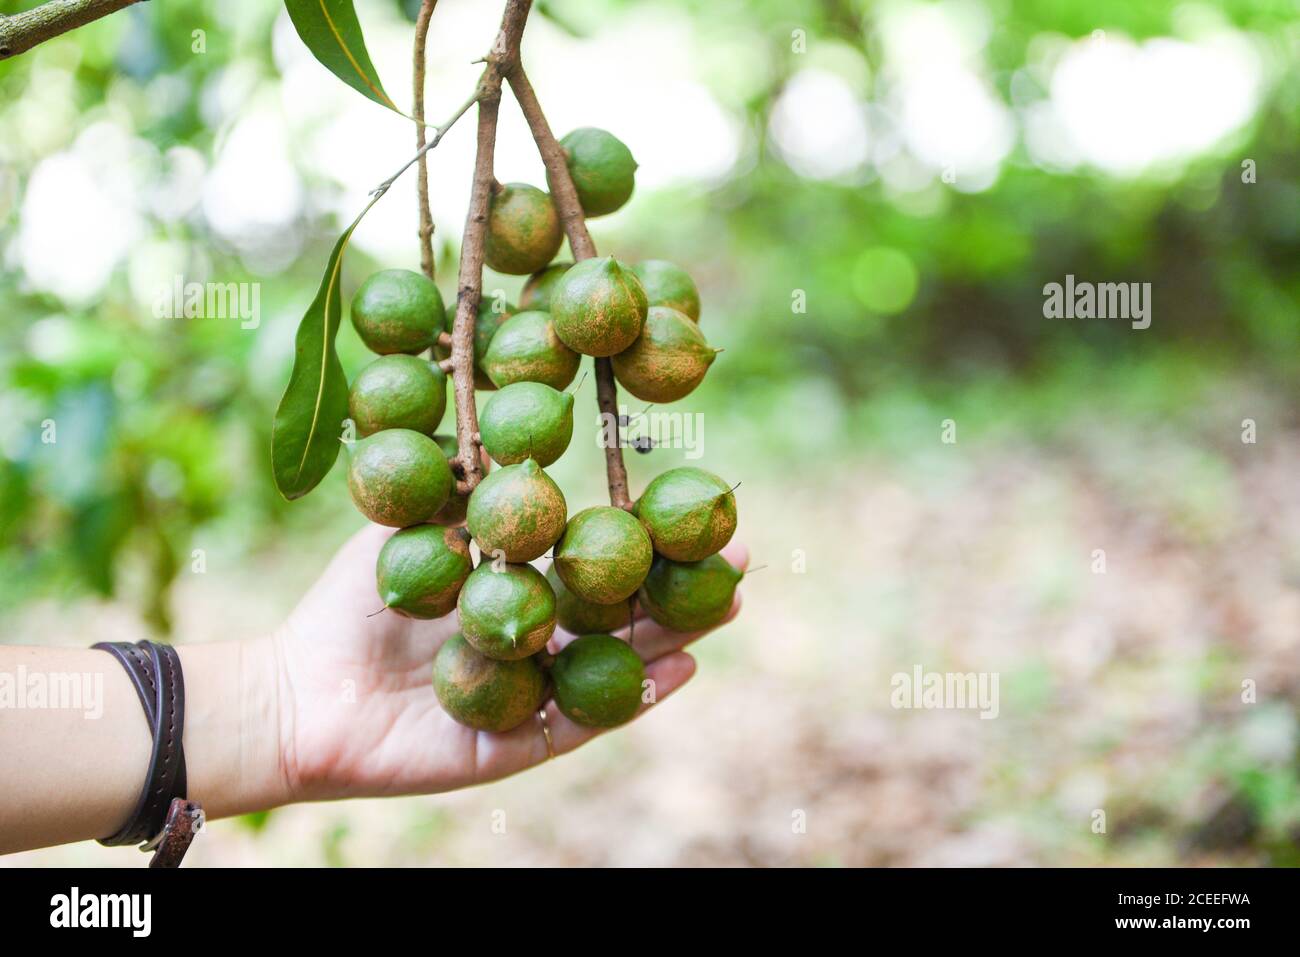 Macadamia tree in farm and woman hand holding macadamia nut in natural Stock Photo